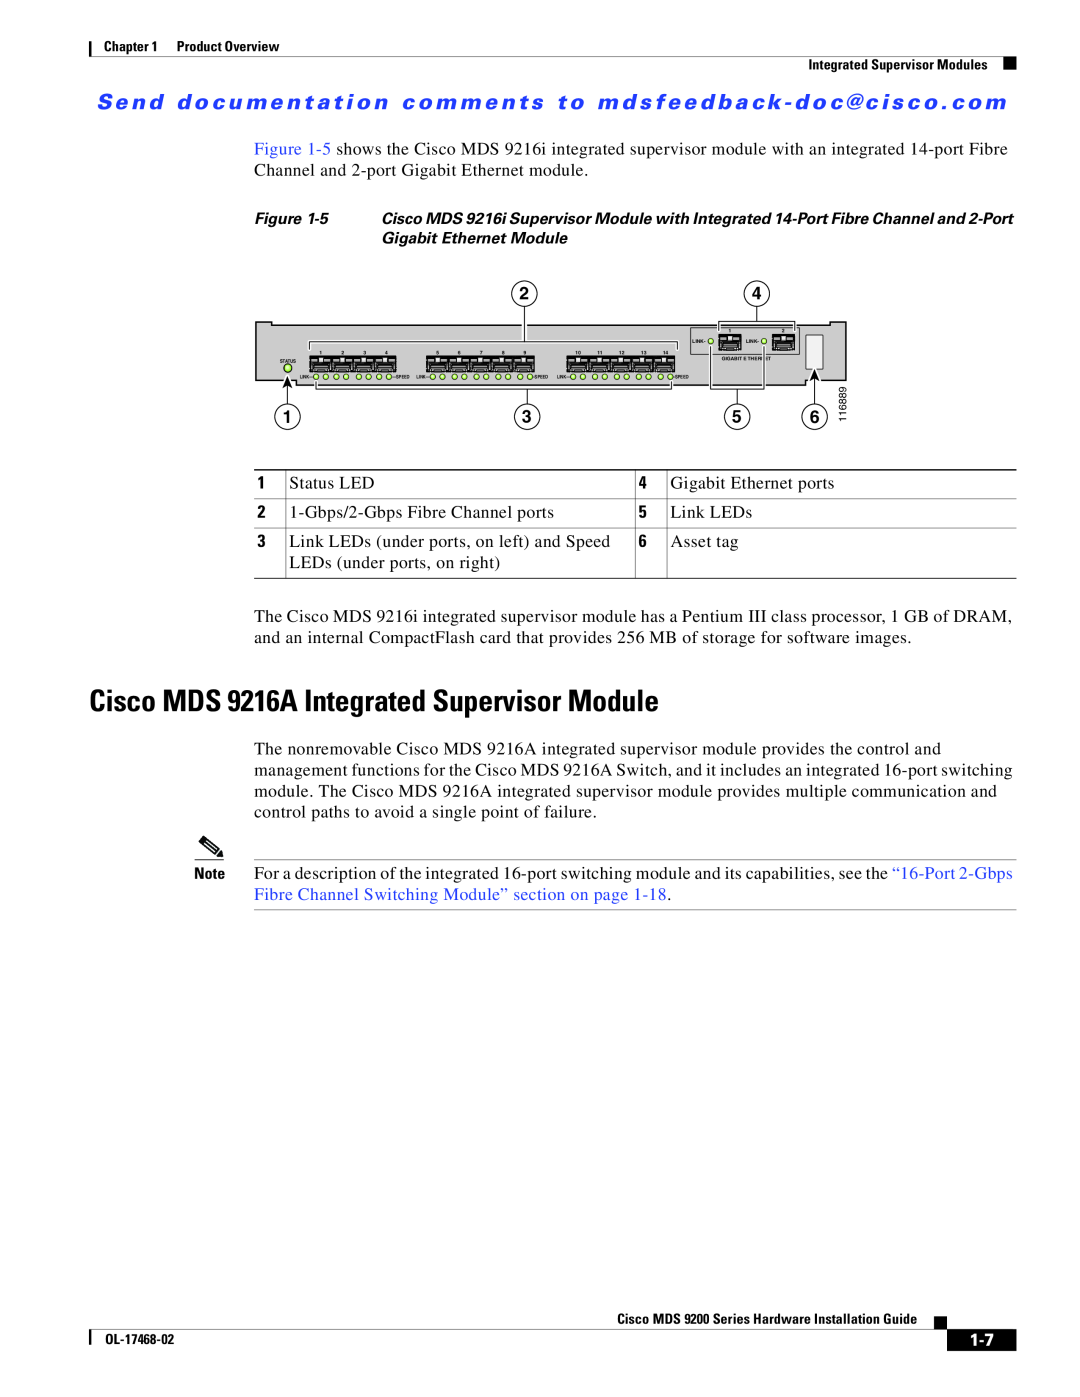 Cisco Systems MDS 9200 Series manual Cisco MDS 9216A Integrated Supervisor Module 